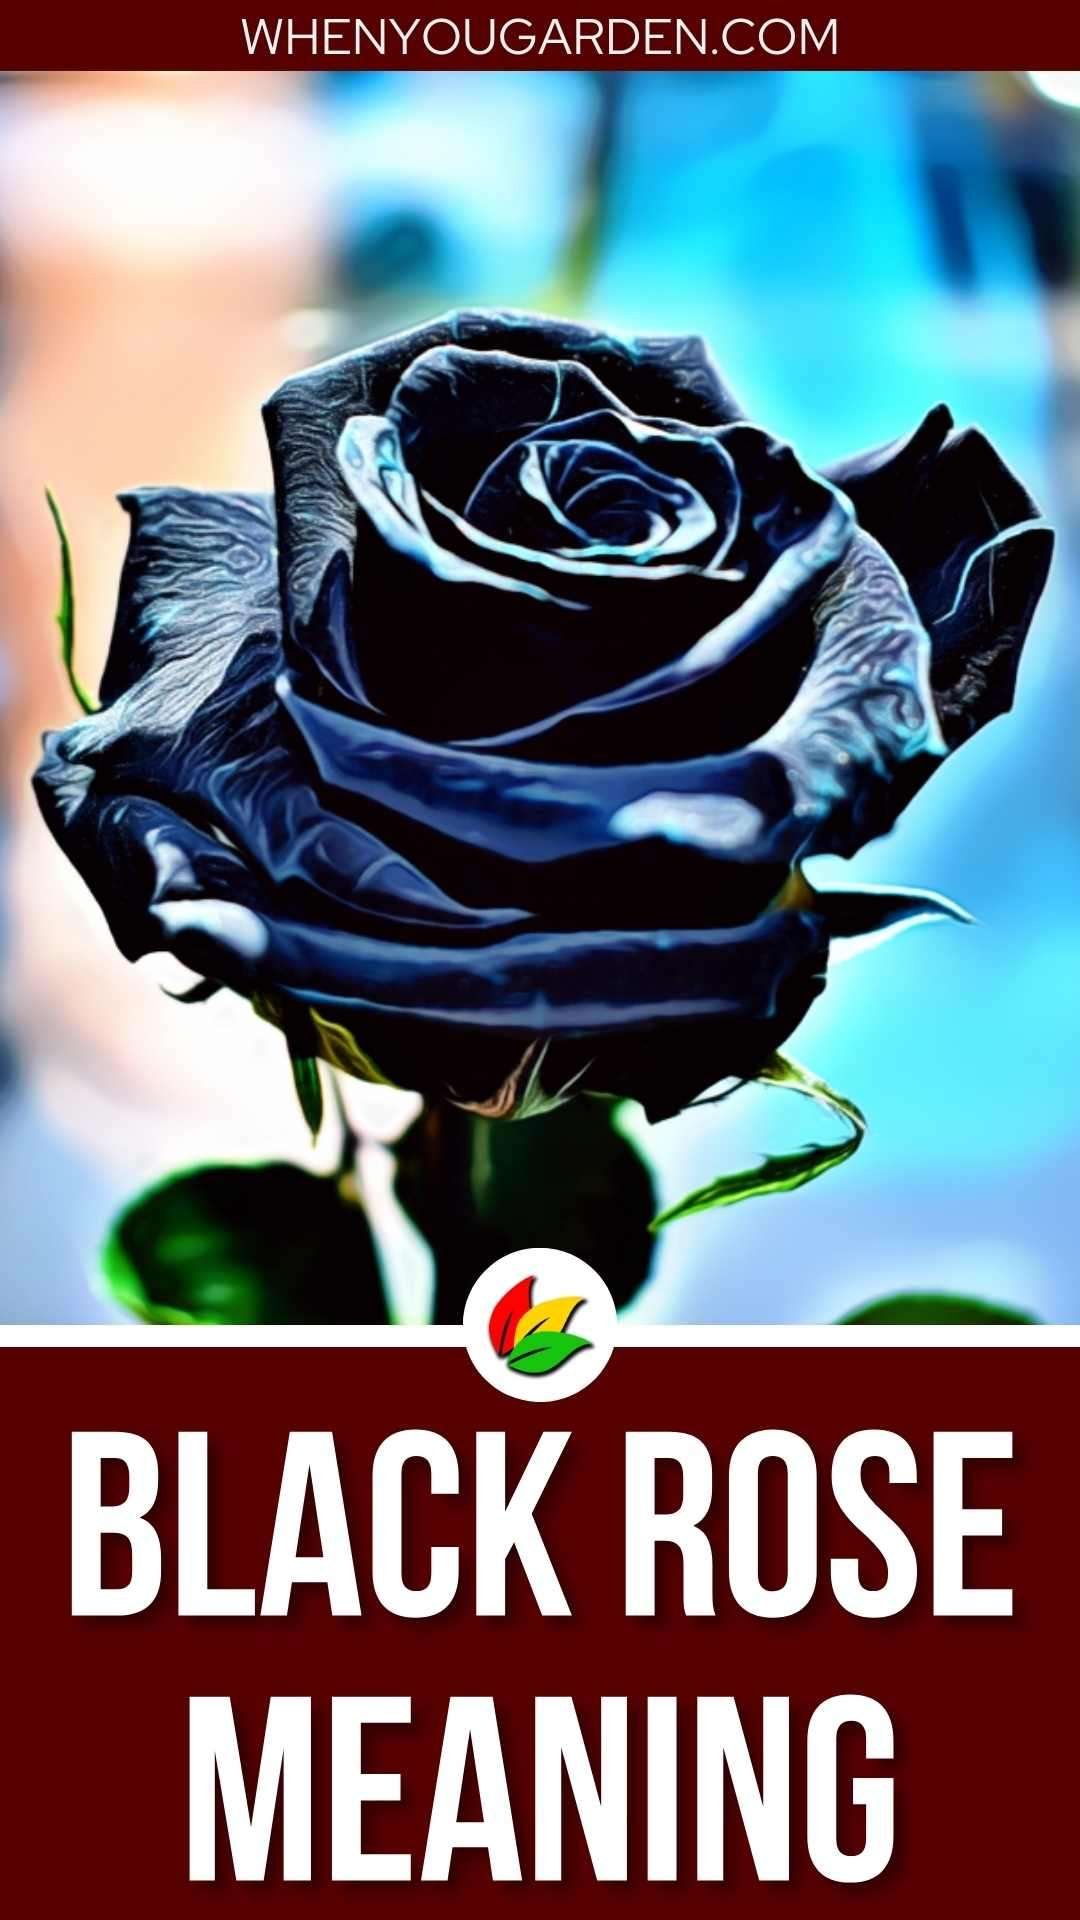 Black Rose Meaning and Symbolism